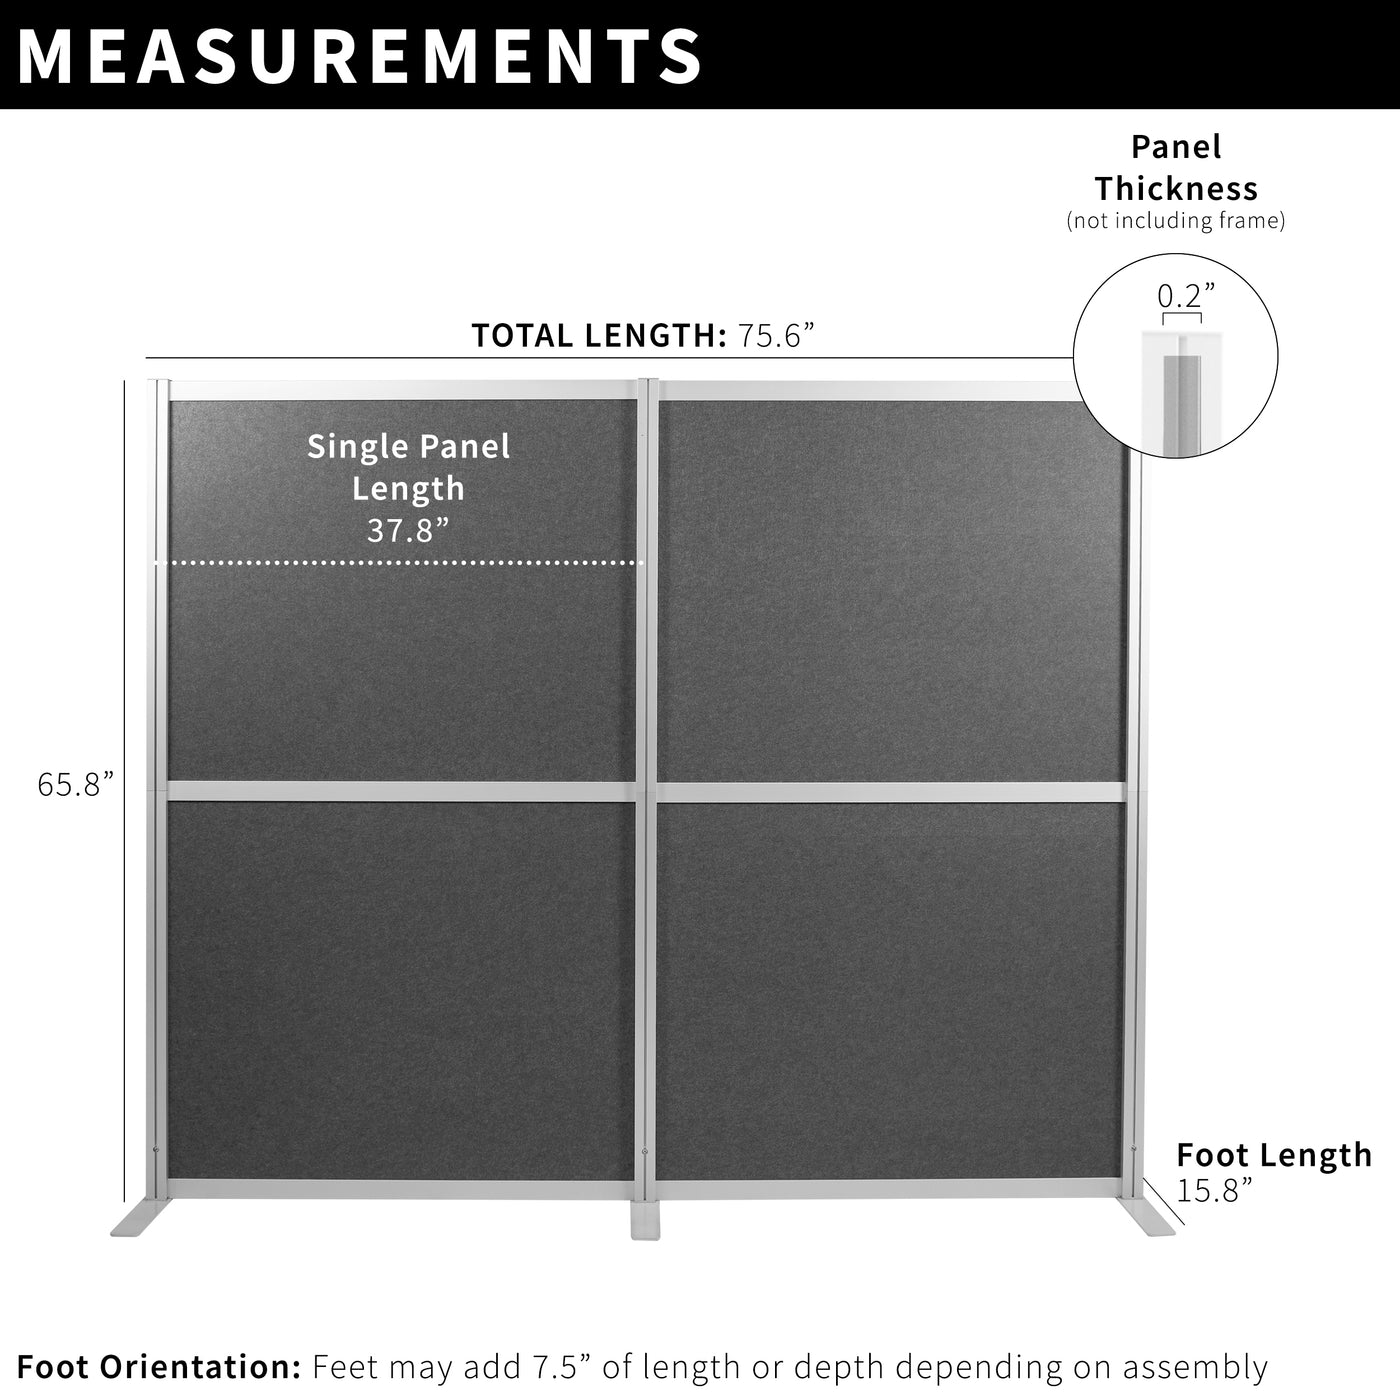 Specification and measurements of the four-panel room divider.